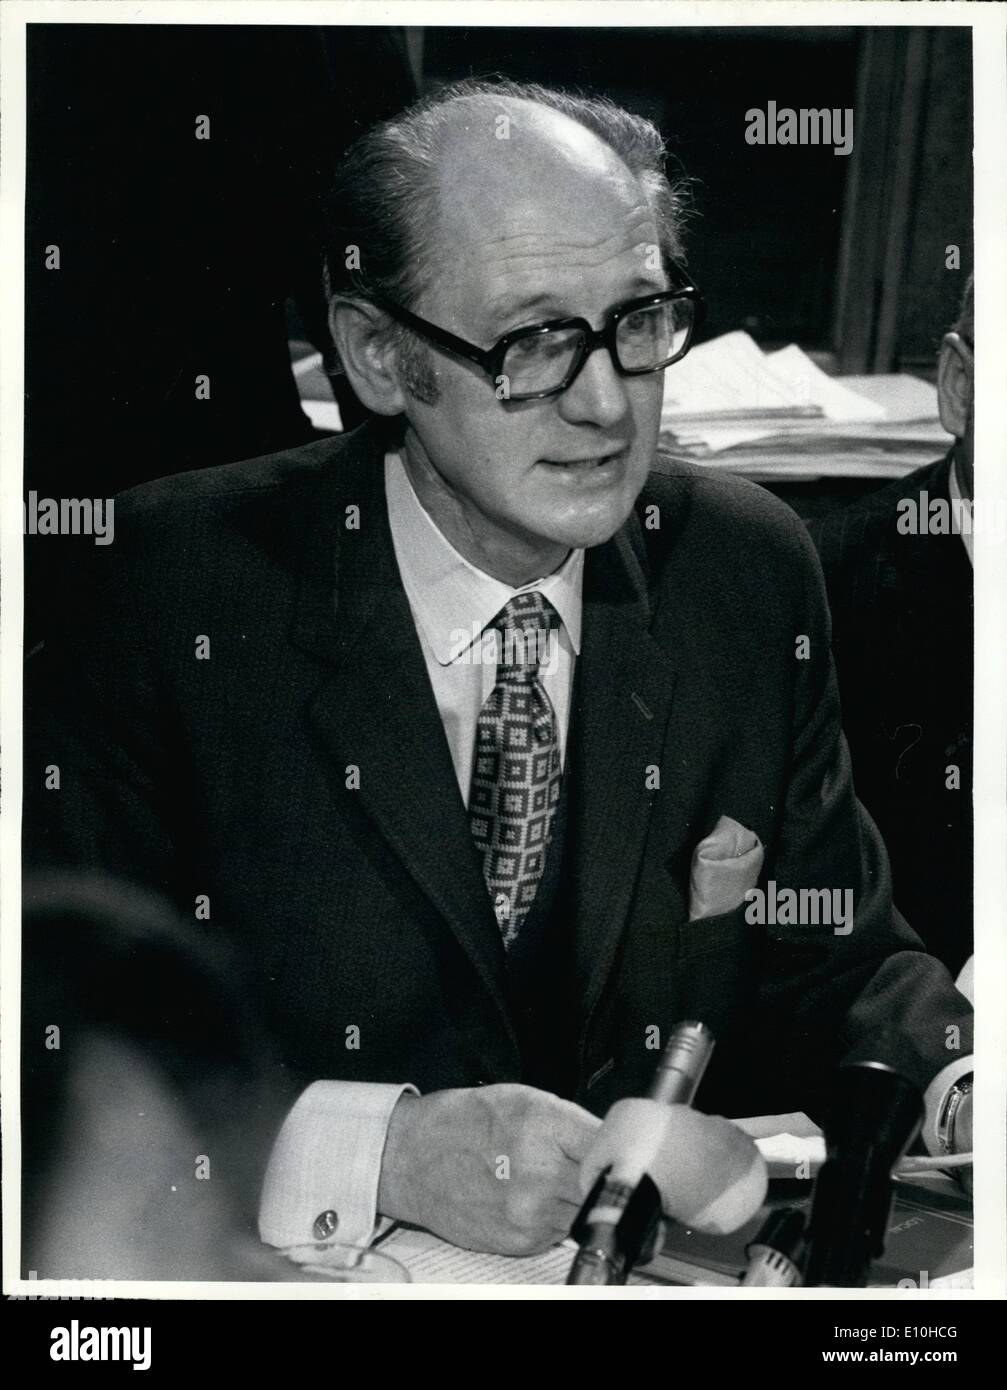 Feb. 02, 1973 - Eire General Election Photo Shows: Mr. Jack Lynch, Prime Minister of Eire, pictured whilst campaigning for the Eire General Election, polling for which takes place tomorrow. Stock Photo